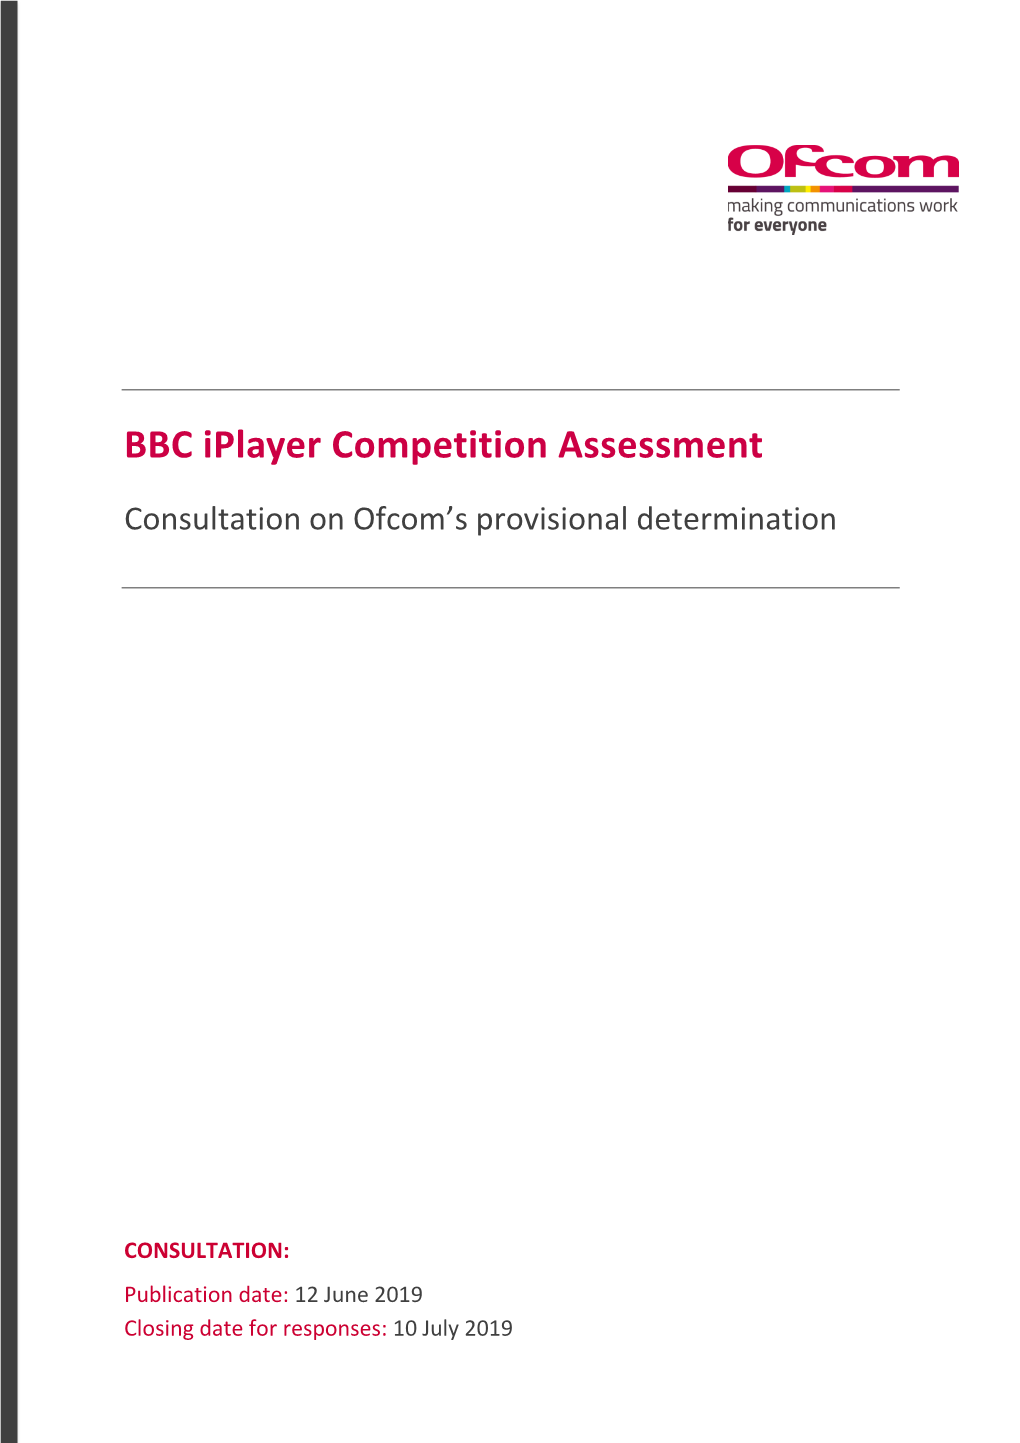 BBC Iplayer Competition Assessment: Consultation on Ofcom's Provisional Determination